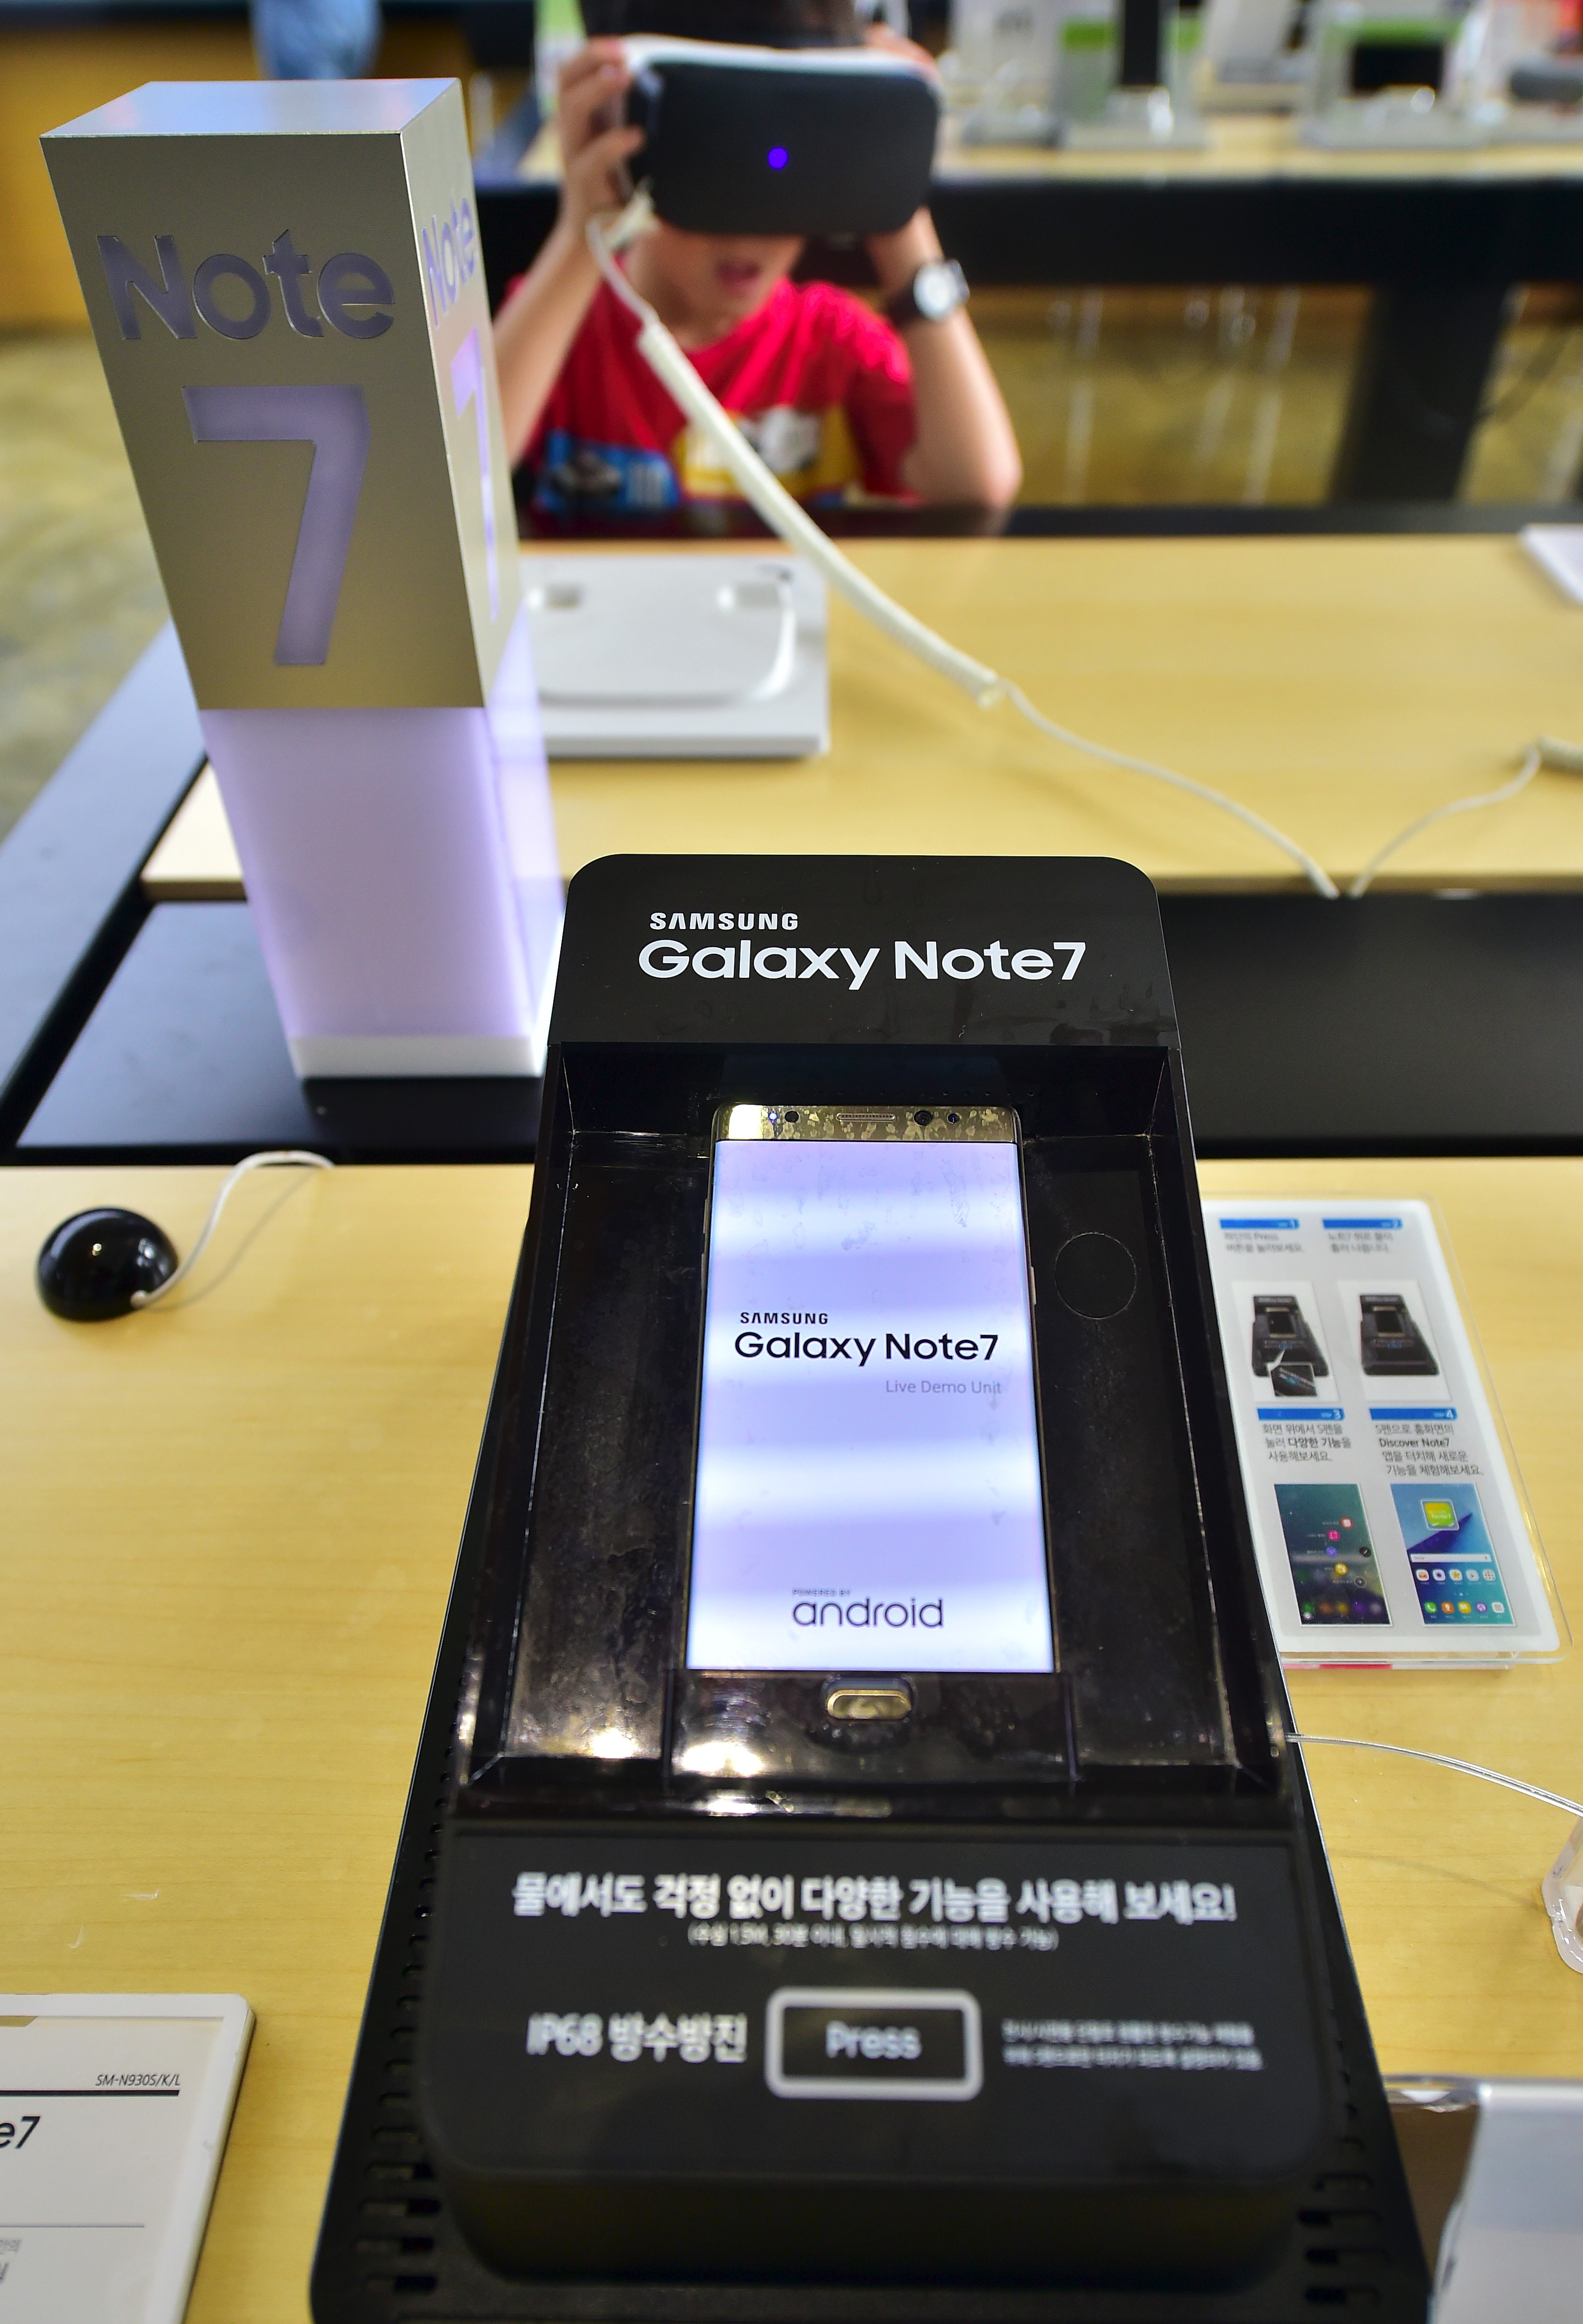 A Galaxy Note 7 smartphone is on display in a waterproof-testing case, whilst a boy (back) experiences Samsung Gear VR at a mobile phone shop in Seoul on September 12, 2016. Samsung shares plunged on September 12 after the South Korean electronics giant urged global users to stop using its Galaxy Note 7 smartphone due to a spate of exploding batteries that raised alarm around the world. / AFP PHOTO / JUNG YEON-JE